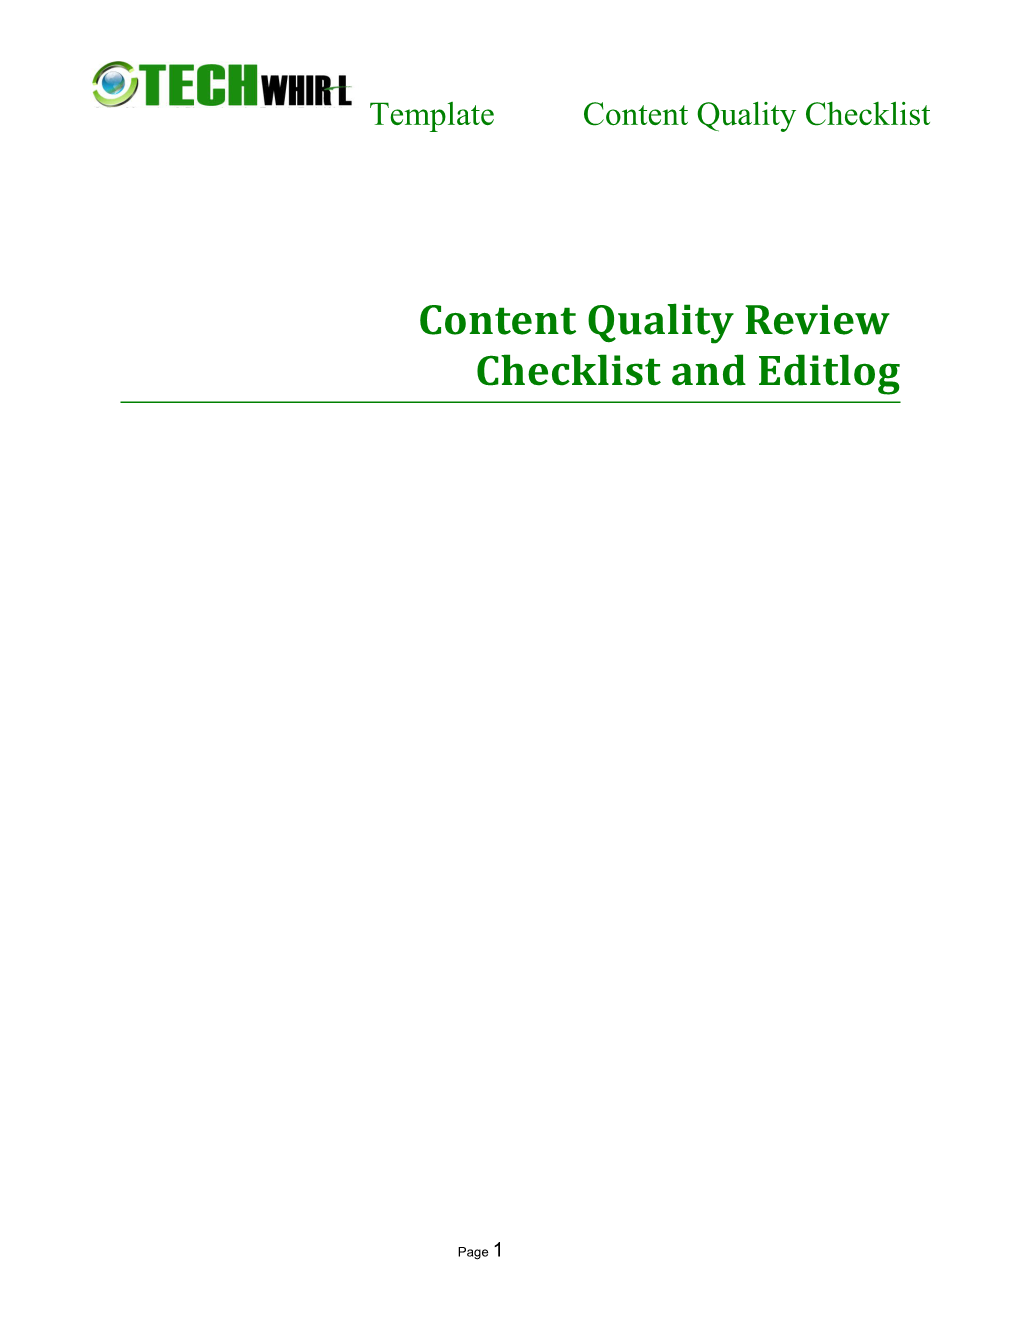 Content Quality Review Checklist and Editlog